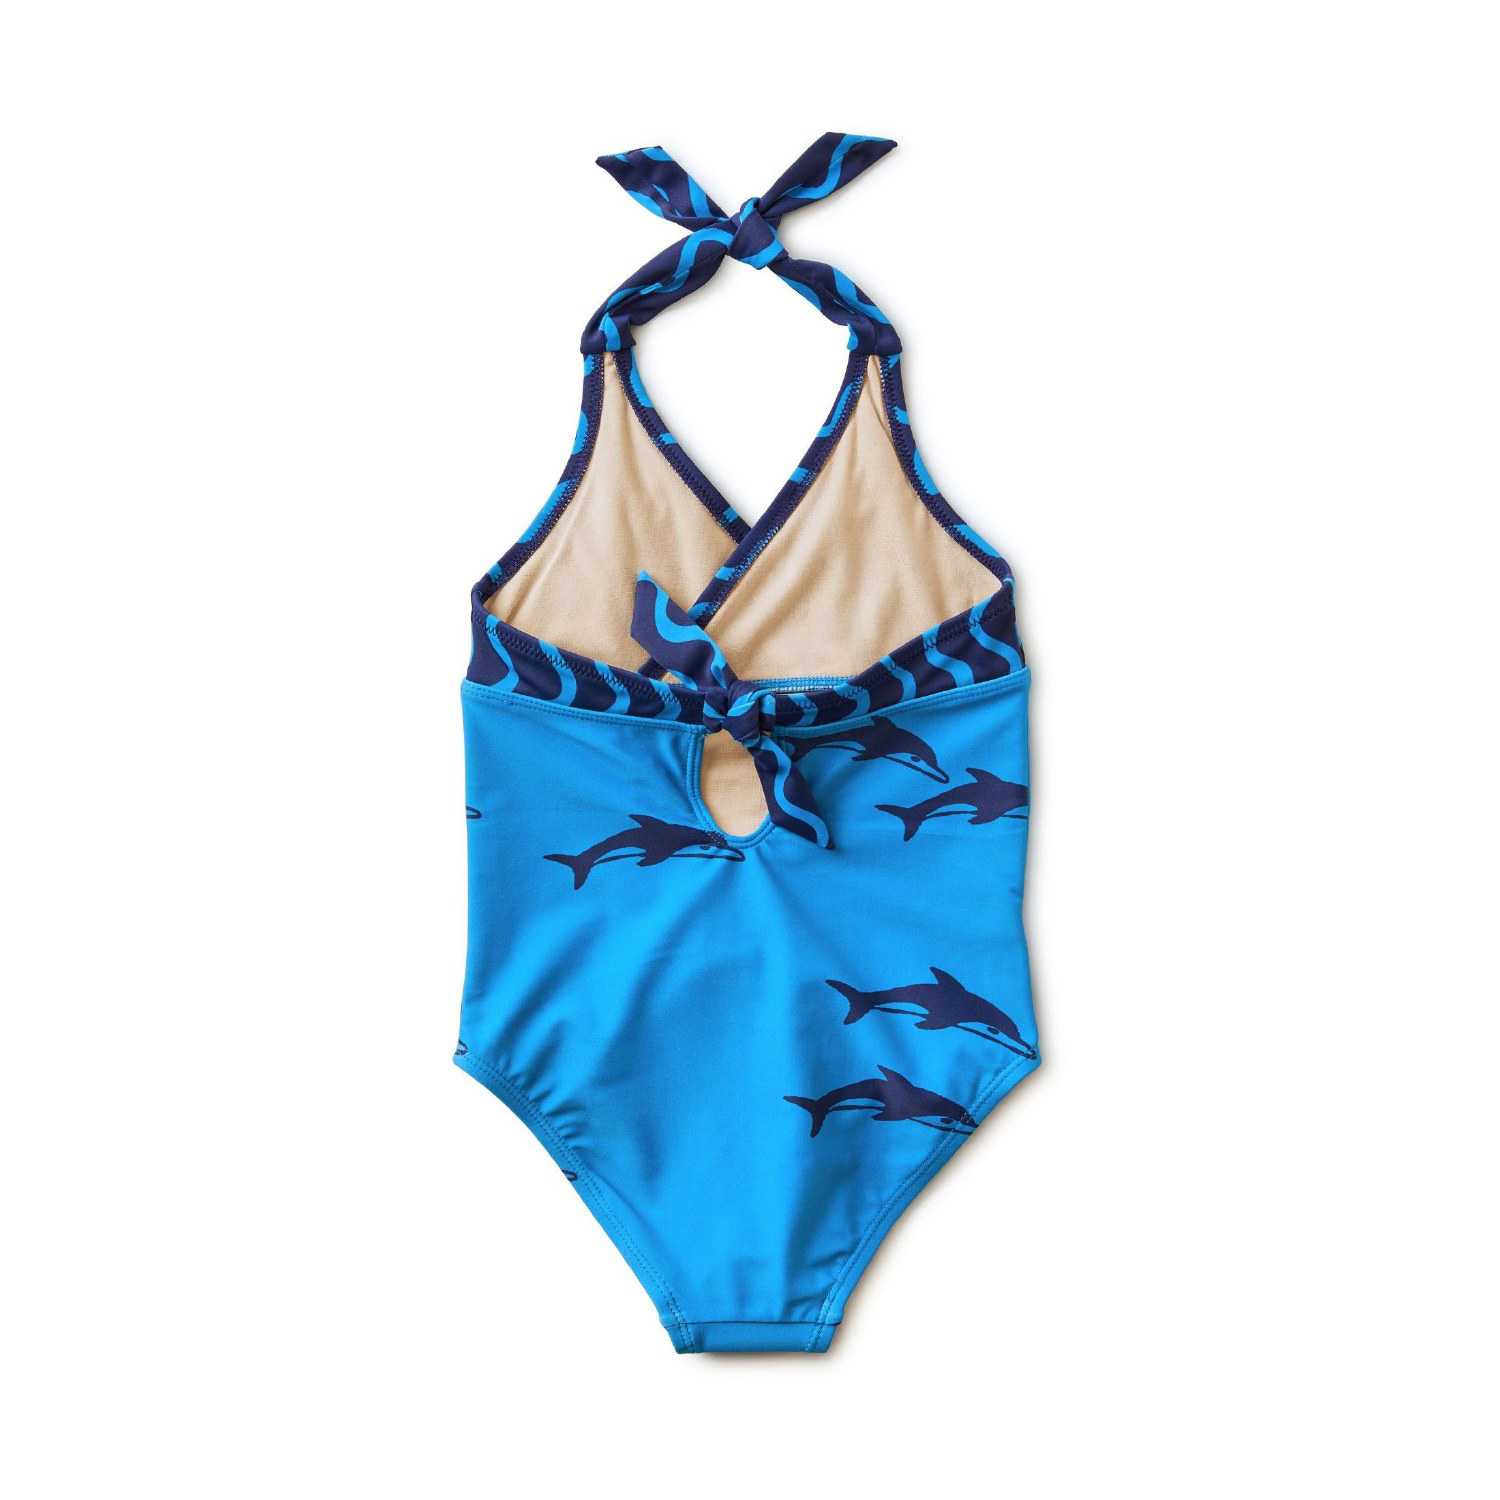 Dolphins halter one piece swimsuit 2